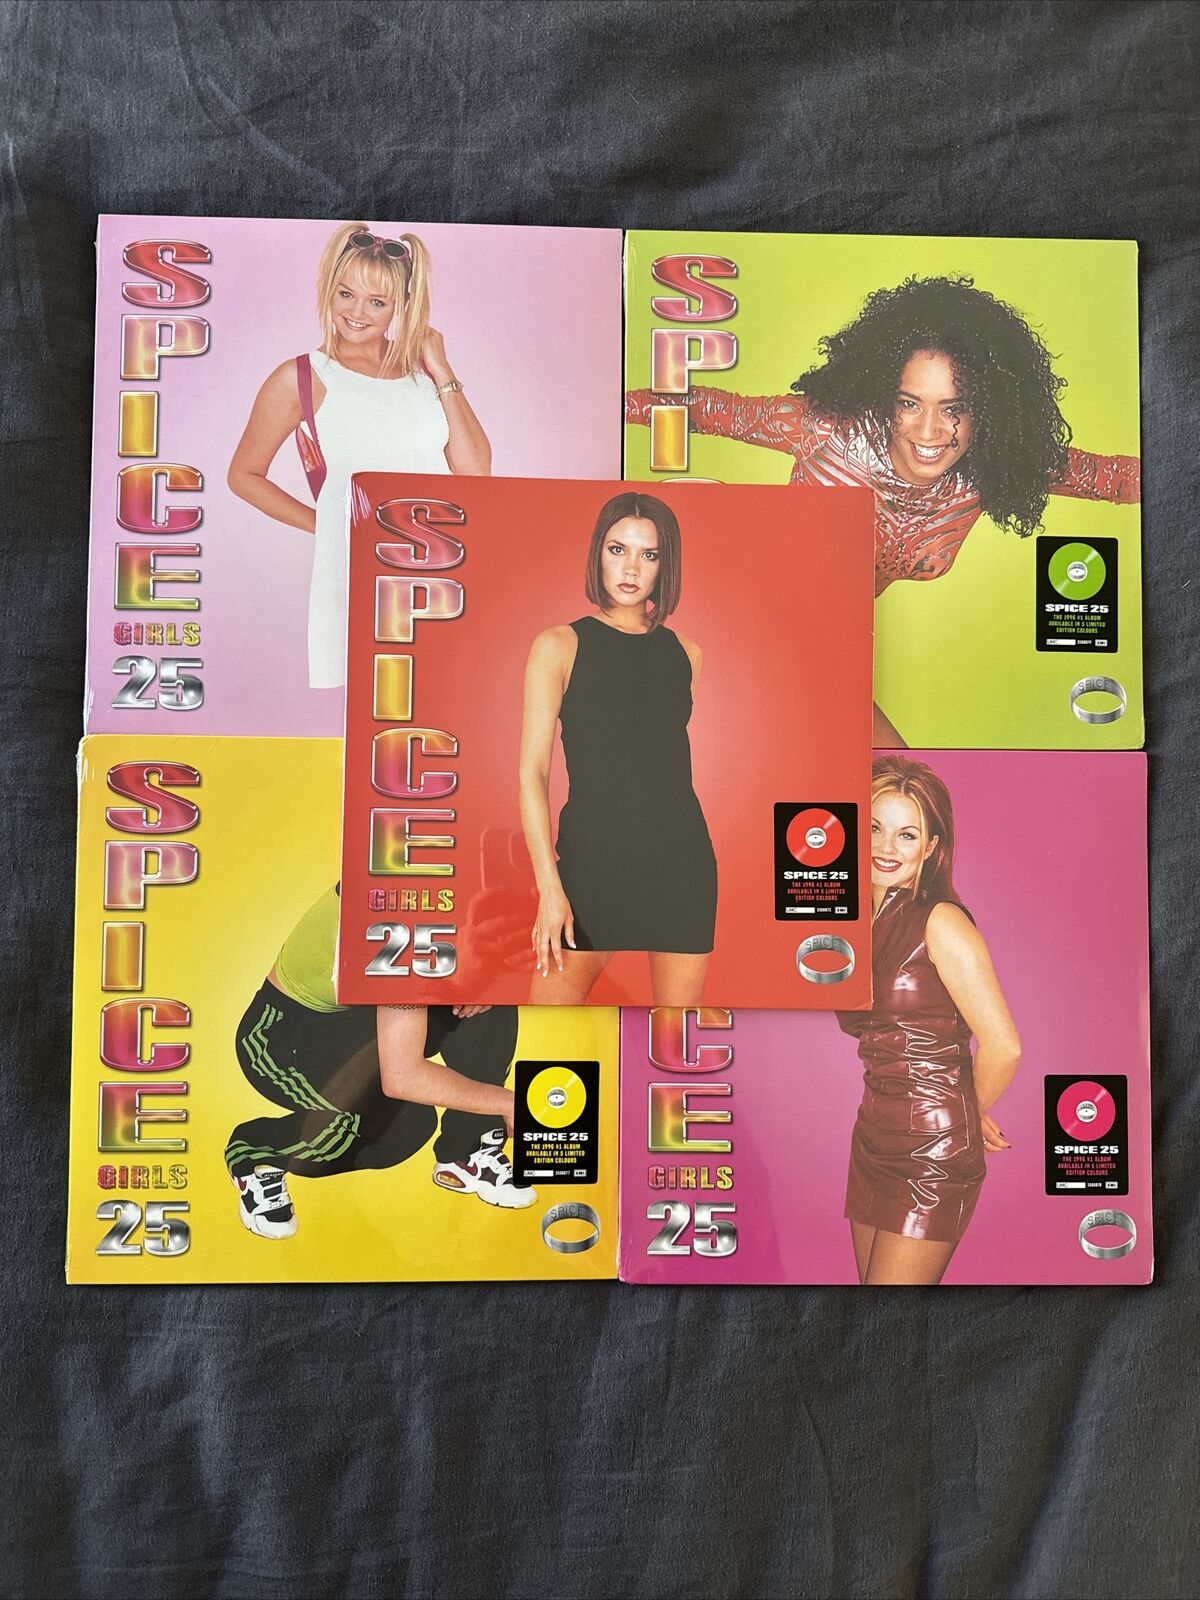 ALL 5 SPICE GIRLS SPICE (25th ANNIVERSARY) NEW SEALED COLOUR DISC VINYL LP